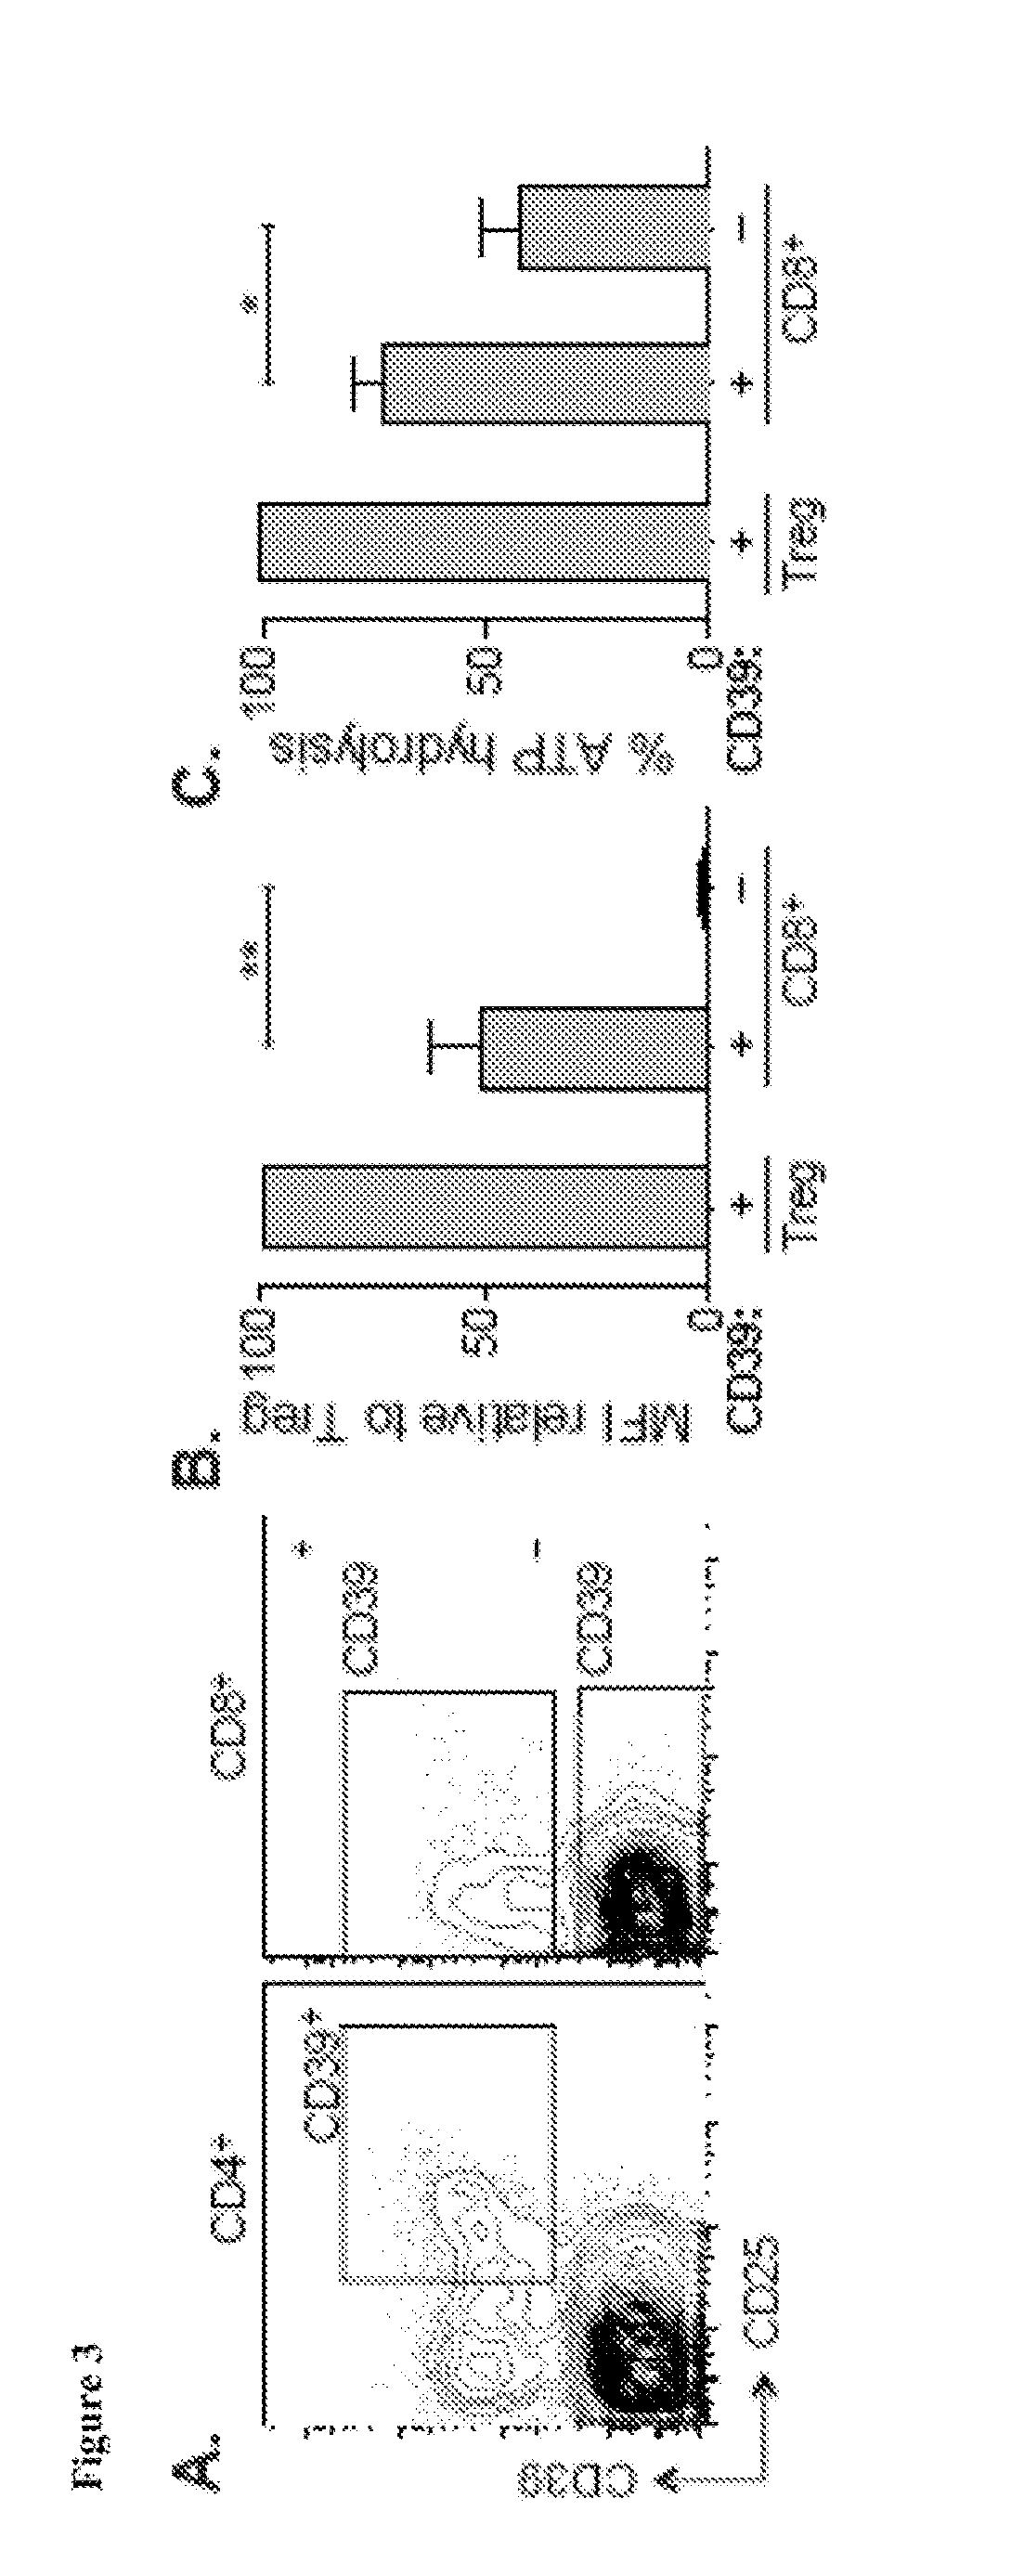 Compositions and methods for identification, assessment, prevention, and treatment of t-cell exhaustion using cd39 biomarkers and modulators